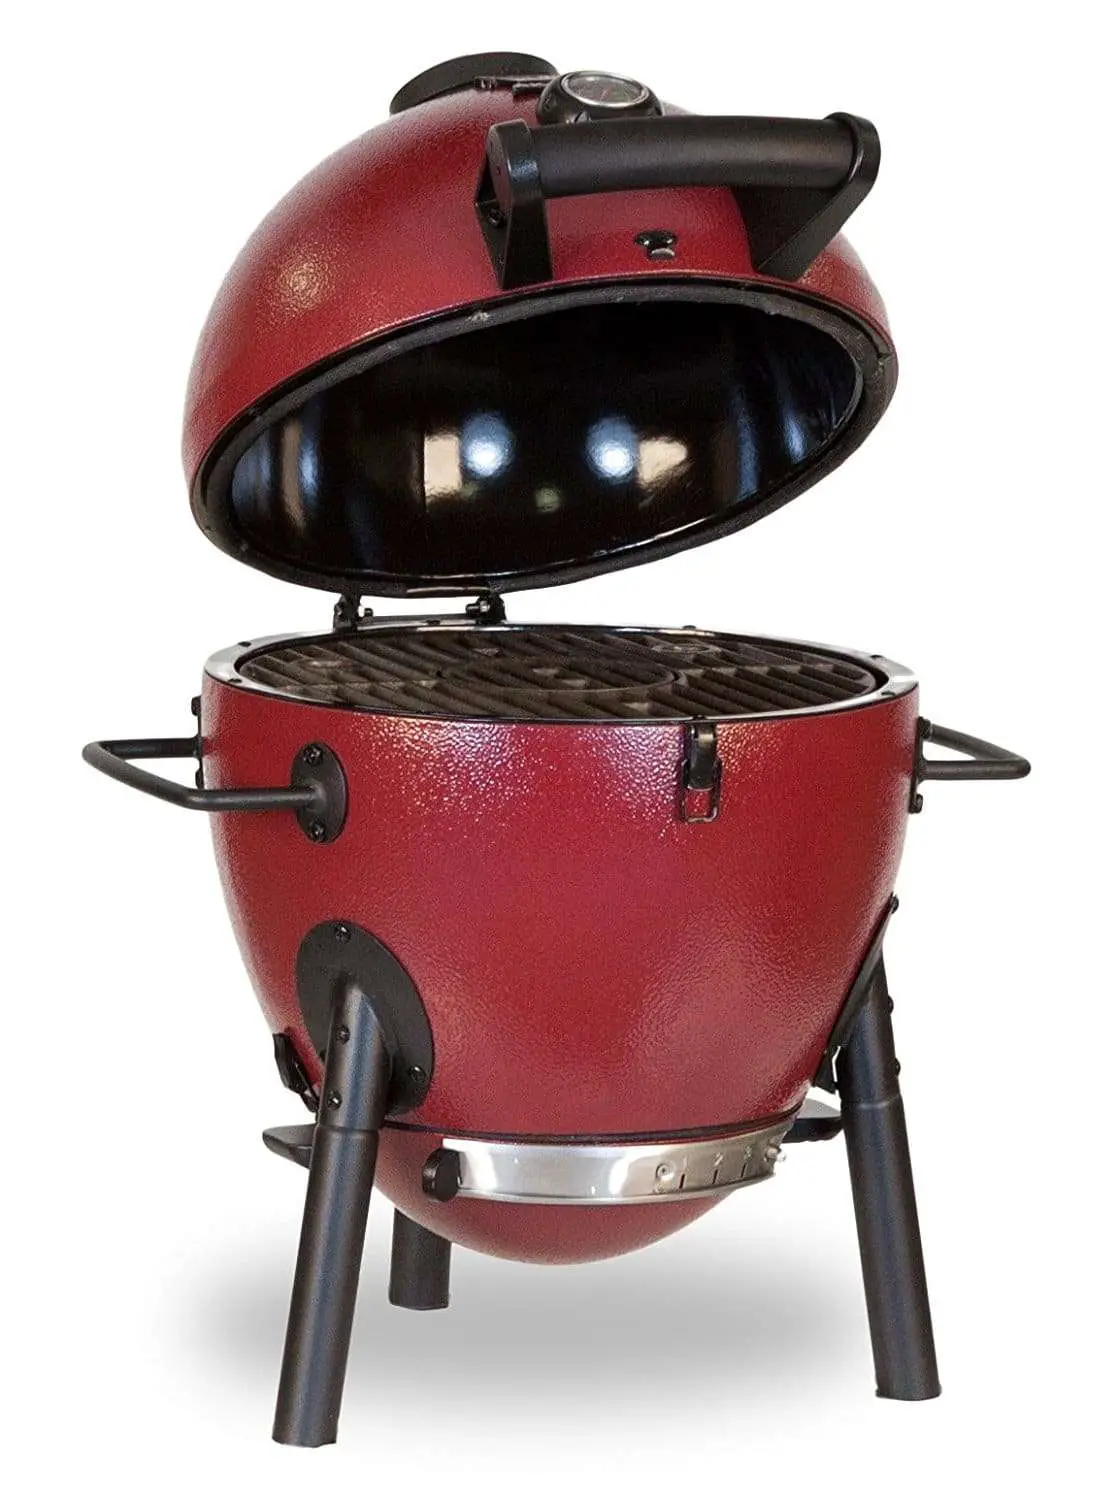 We Reviewed The Best Charcoal Grills For 2019 (Updated)